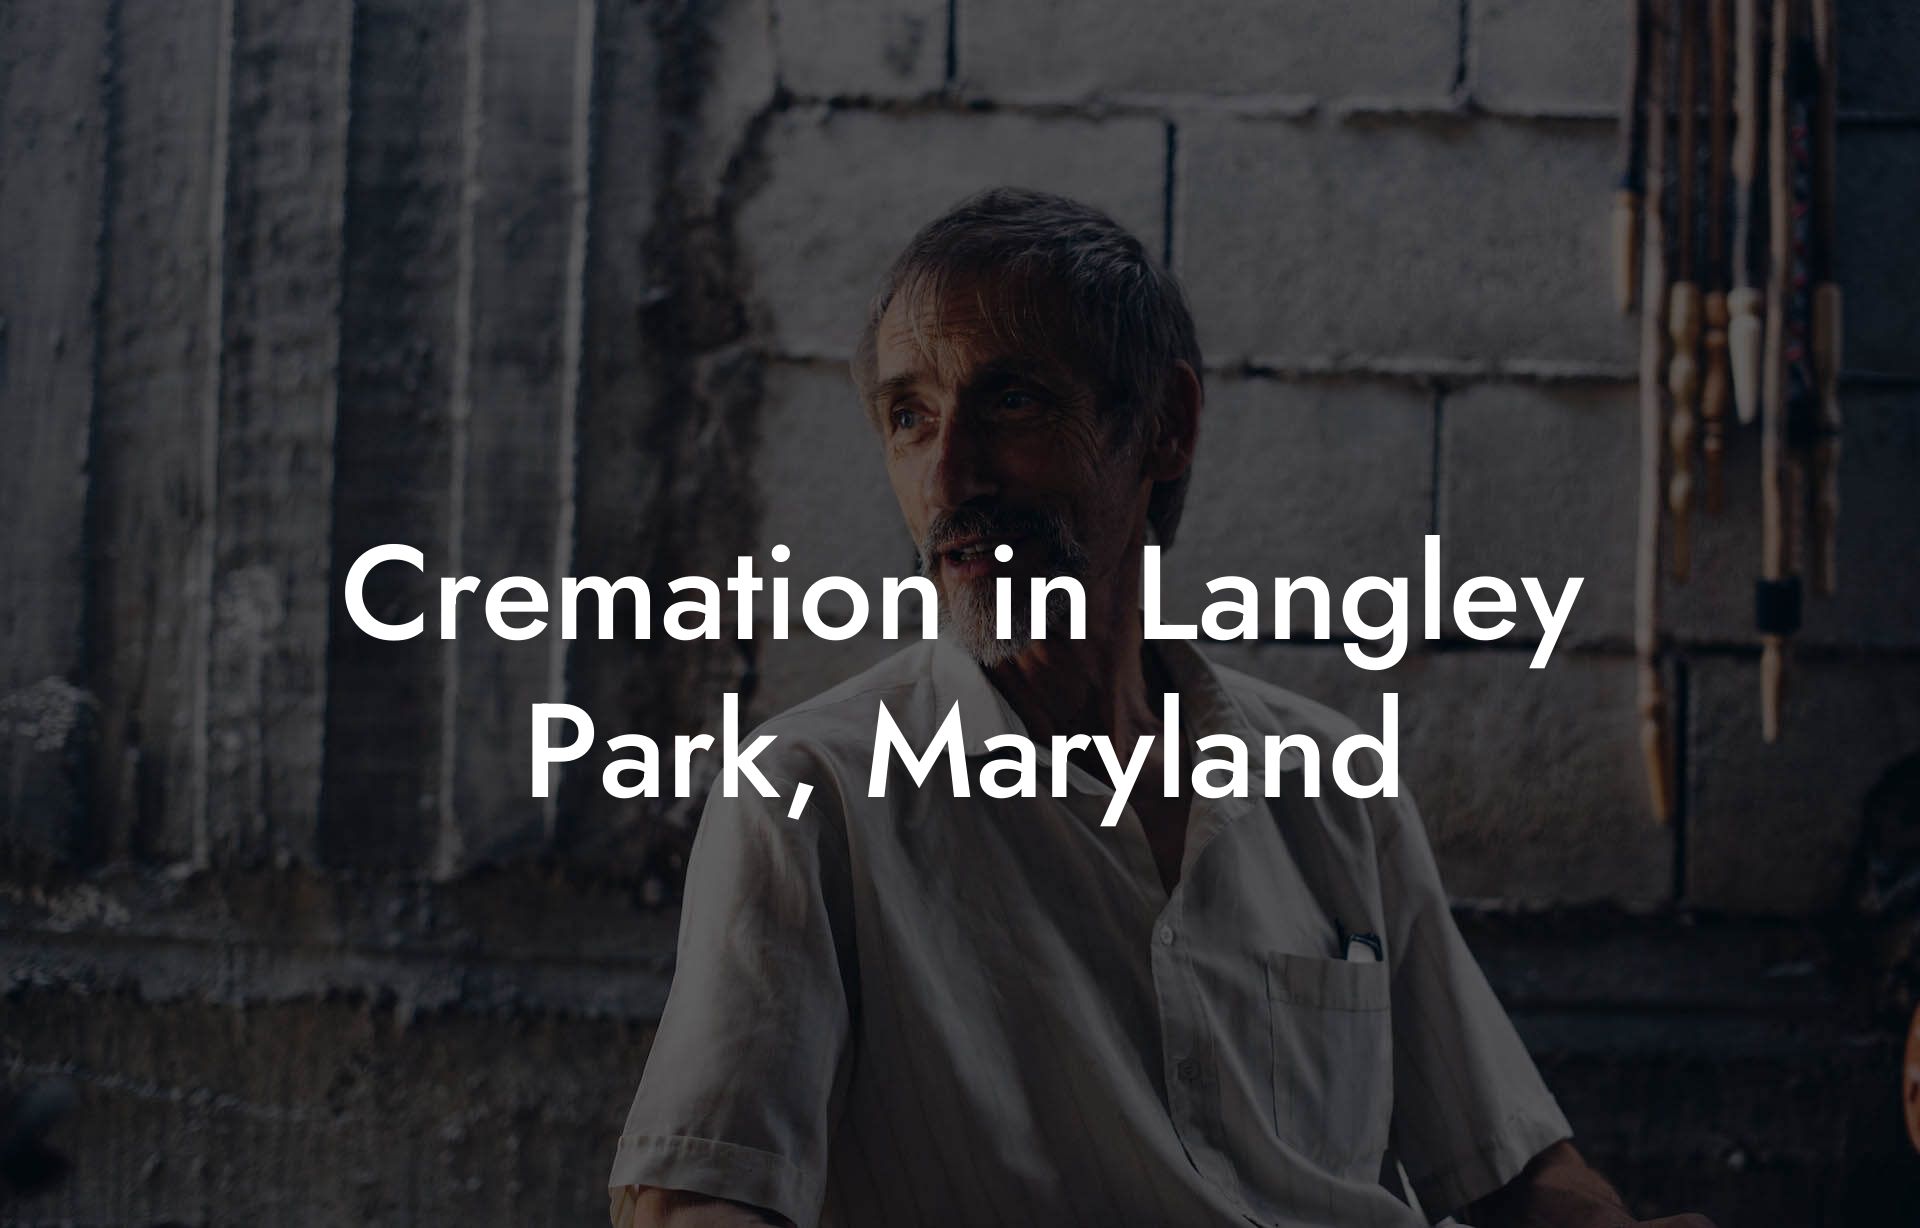 Cremation in Langley Park, Maryland